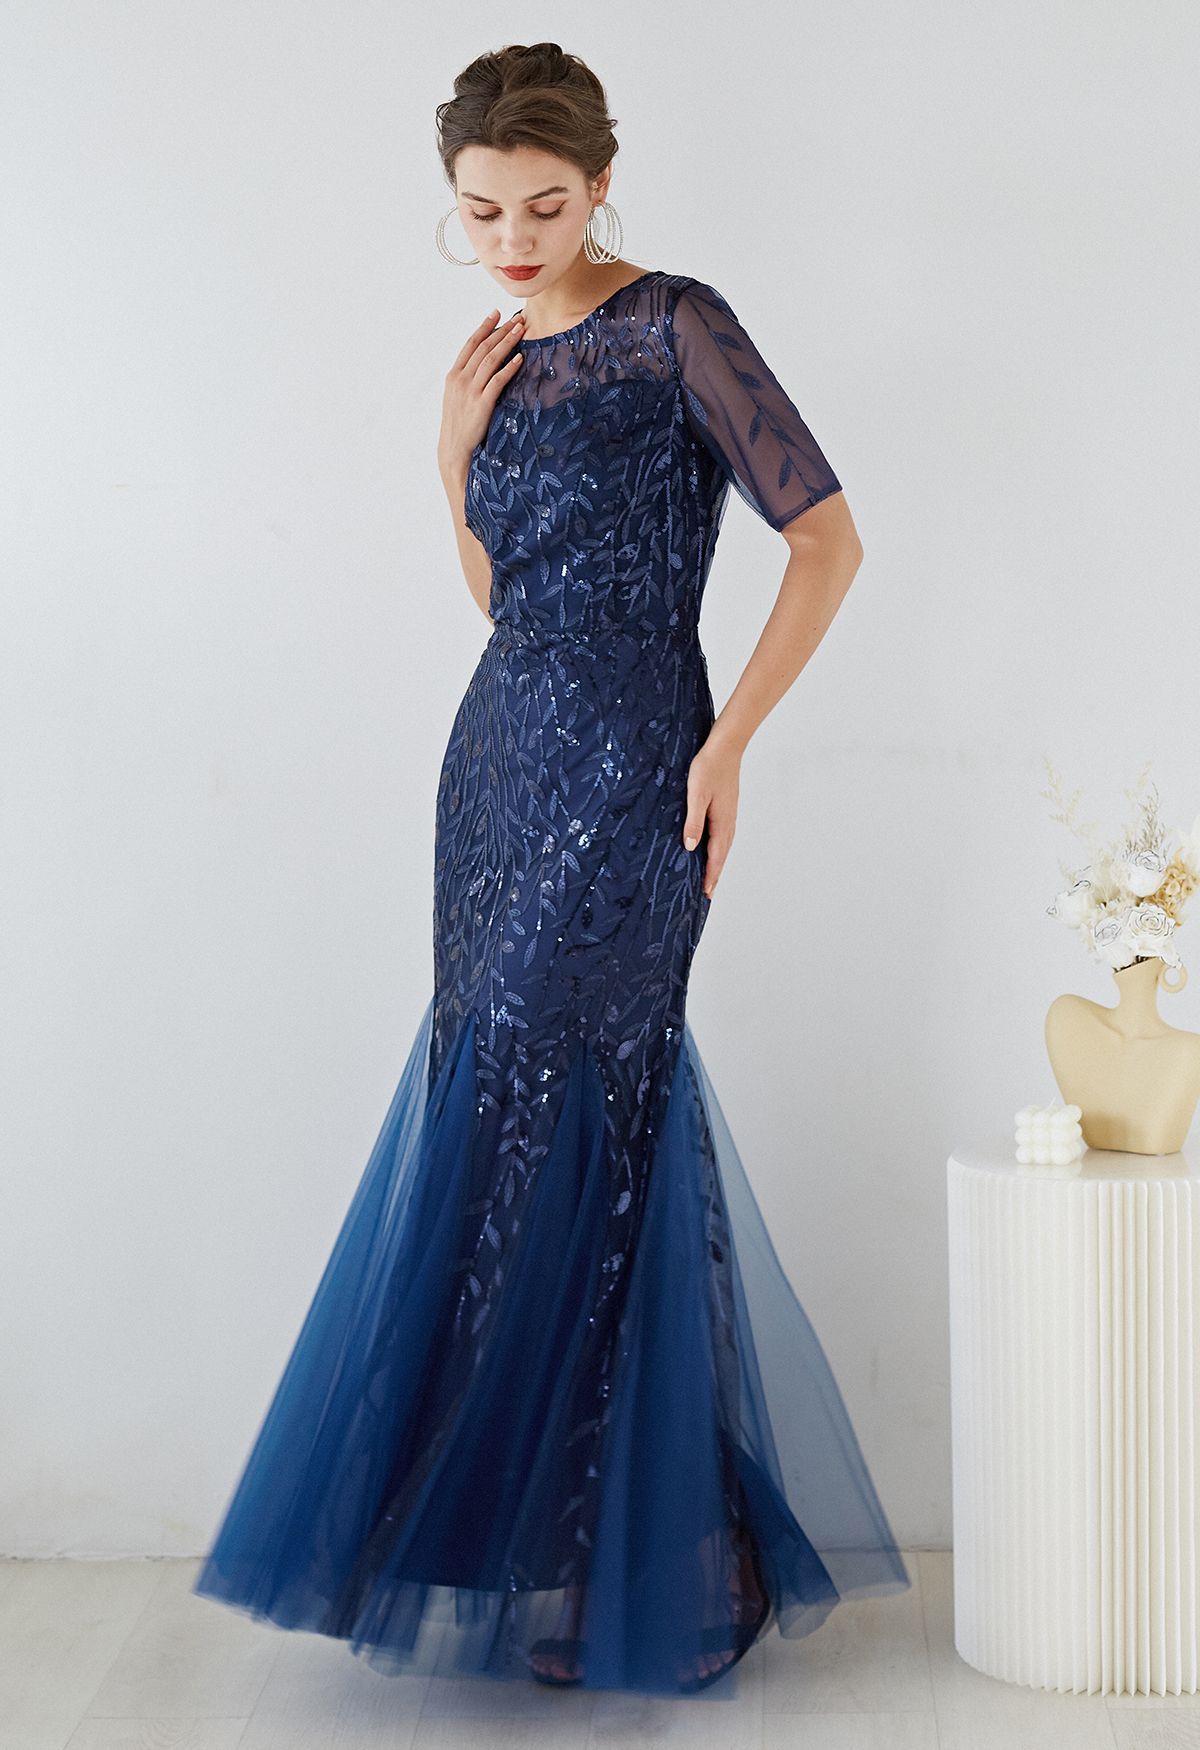 Leaves Branch Sequined Mesh Panelled Gown in Navy